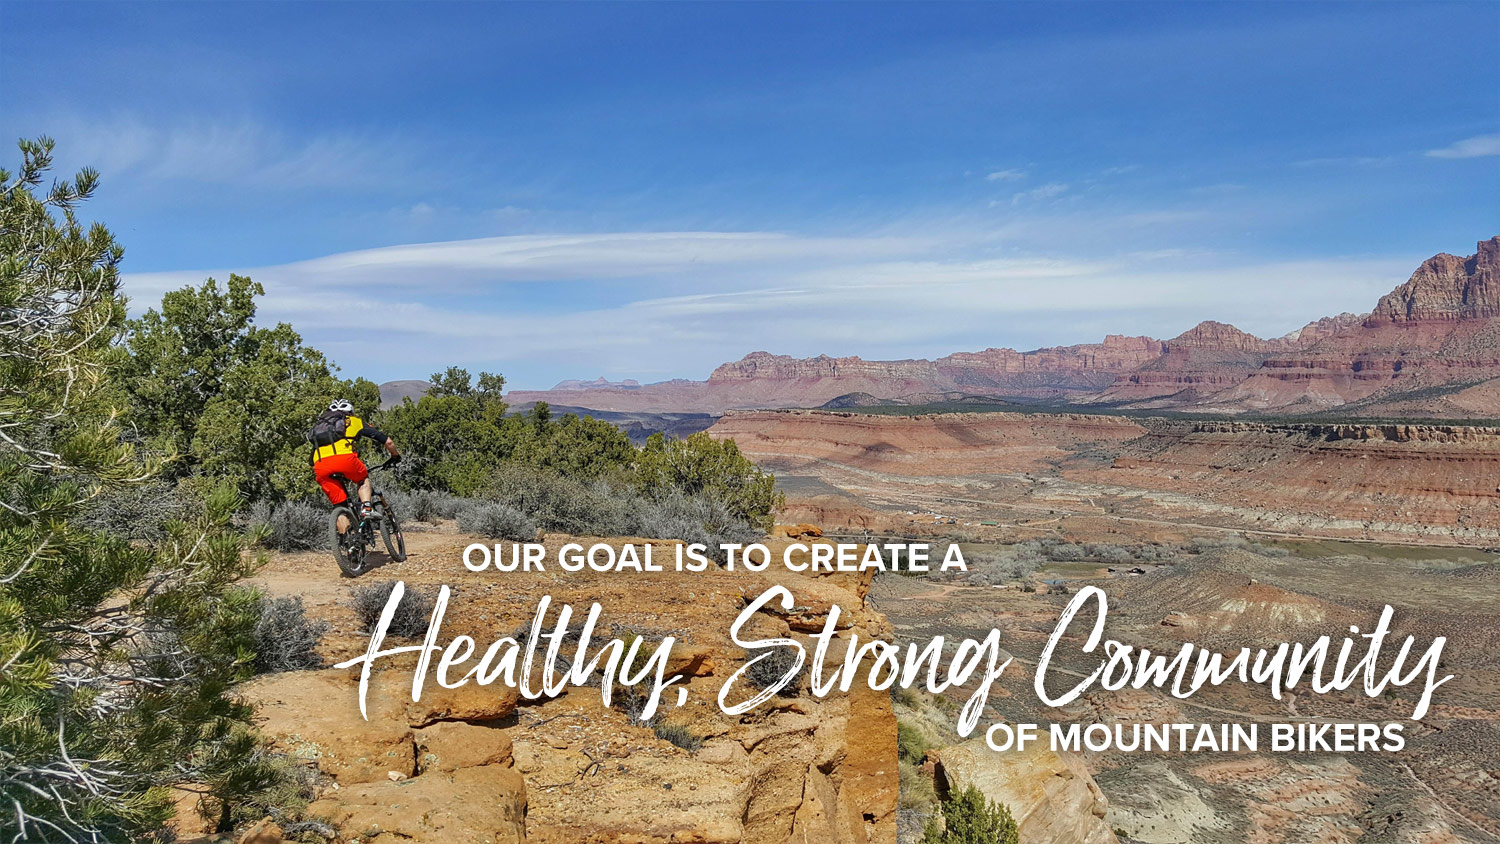 Our goal is to create a healthy, strong community of mountain bikers